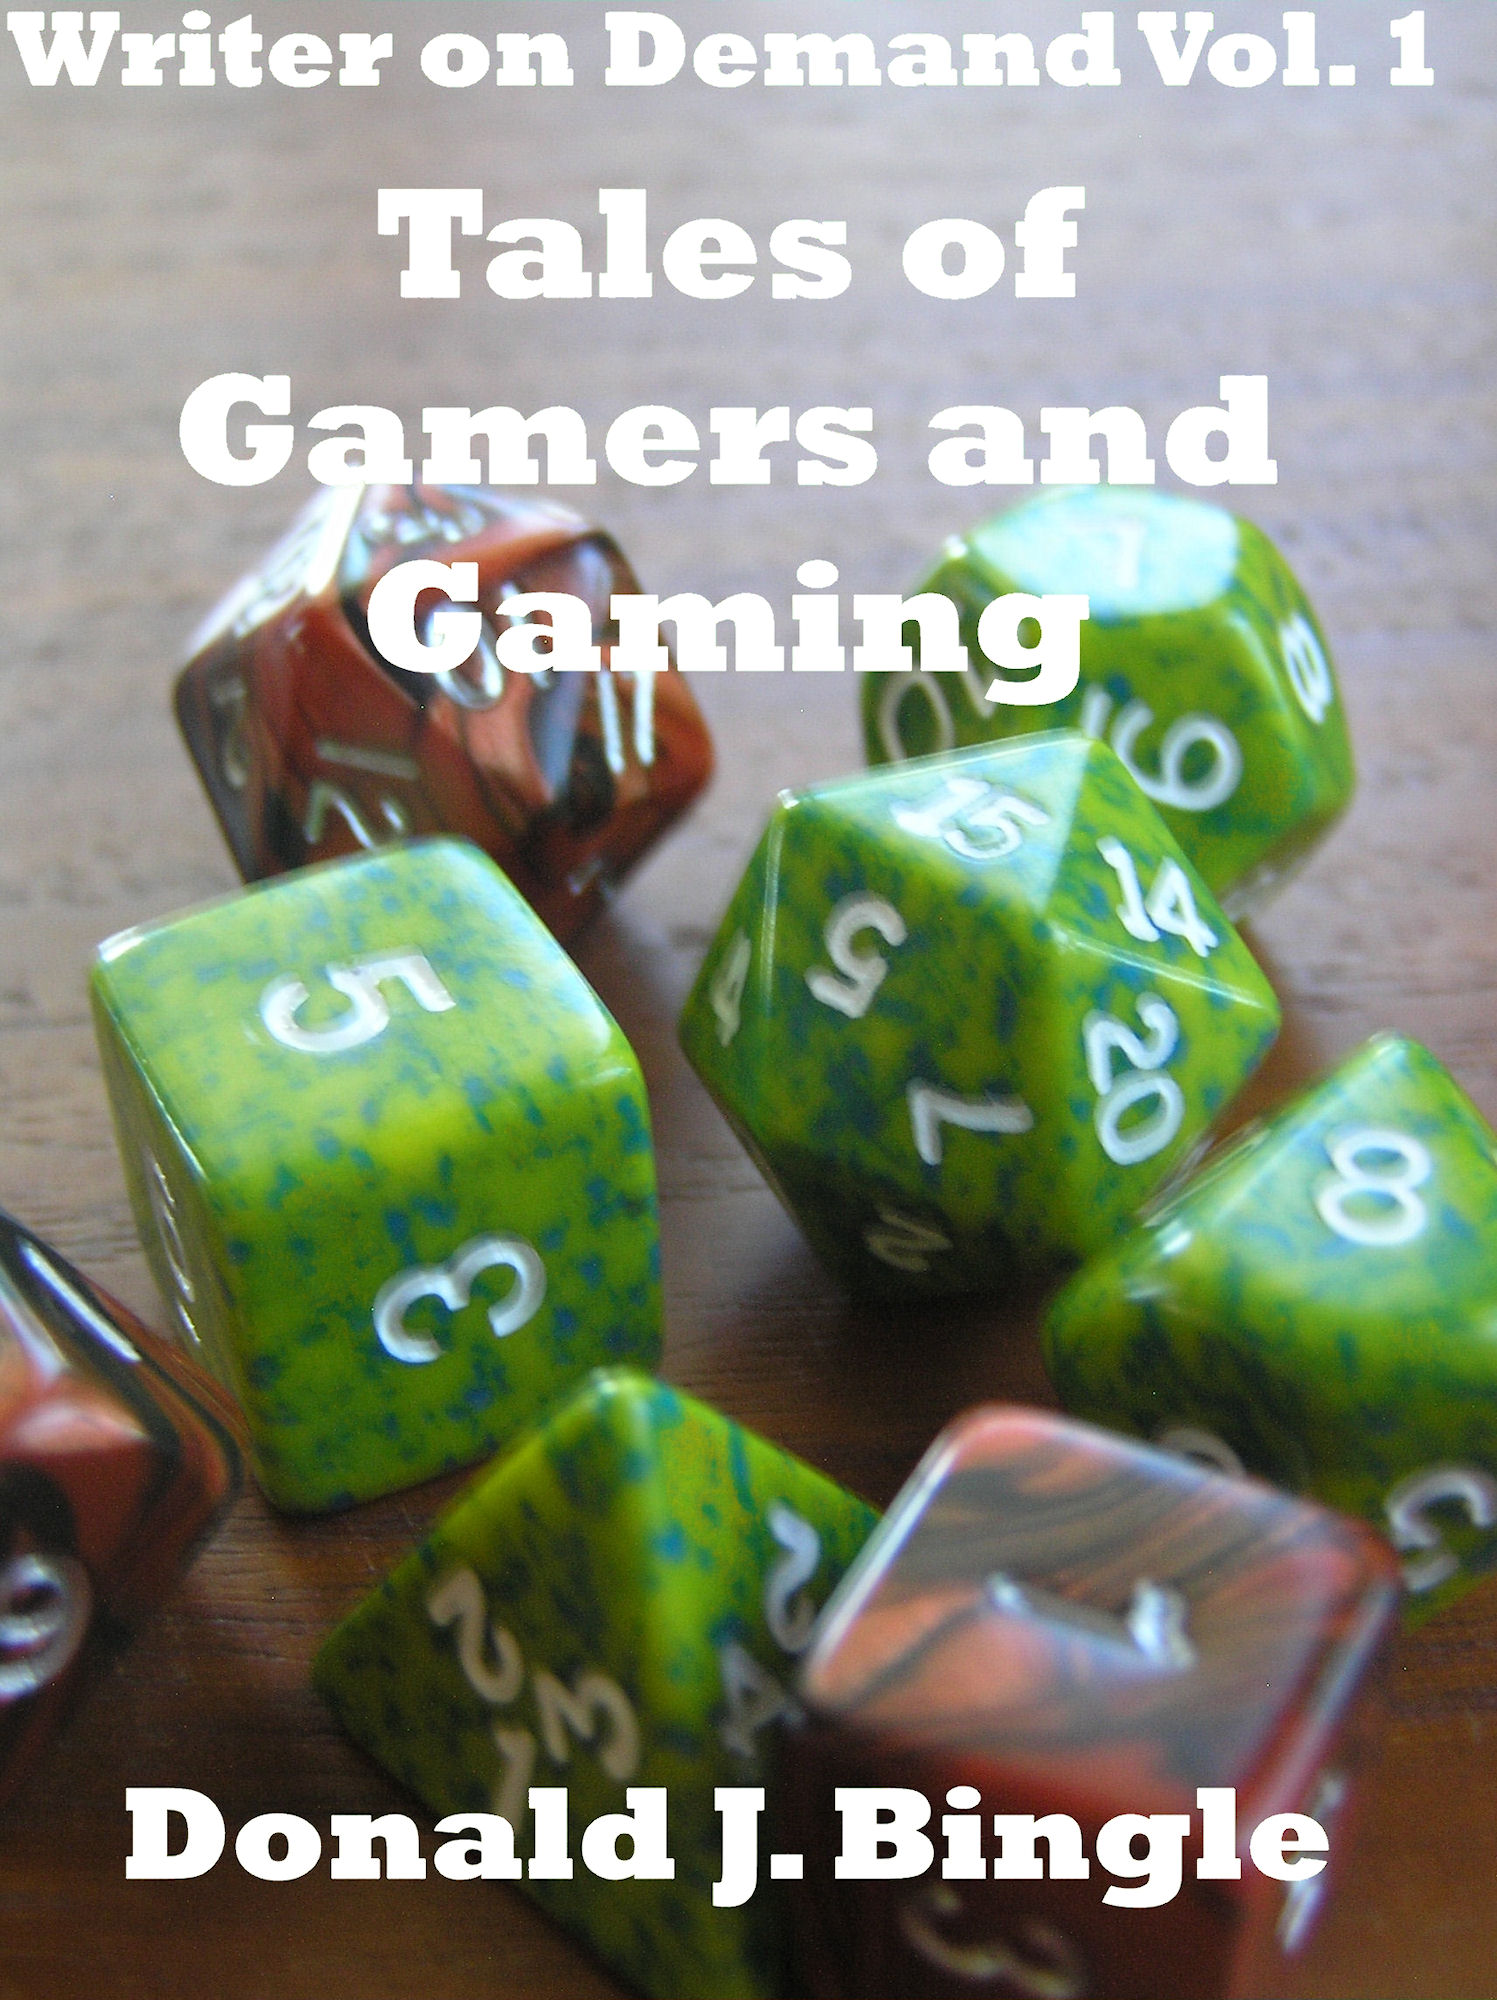 Dice_Cover_Tales_of_Gamers_White_Text_Kindle[1] (2).jpg (468622 bytes)